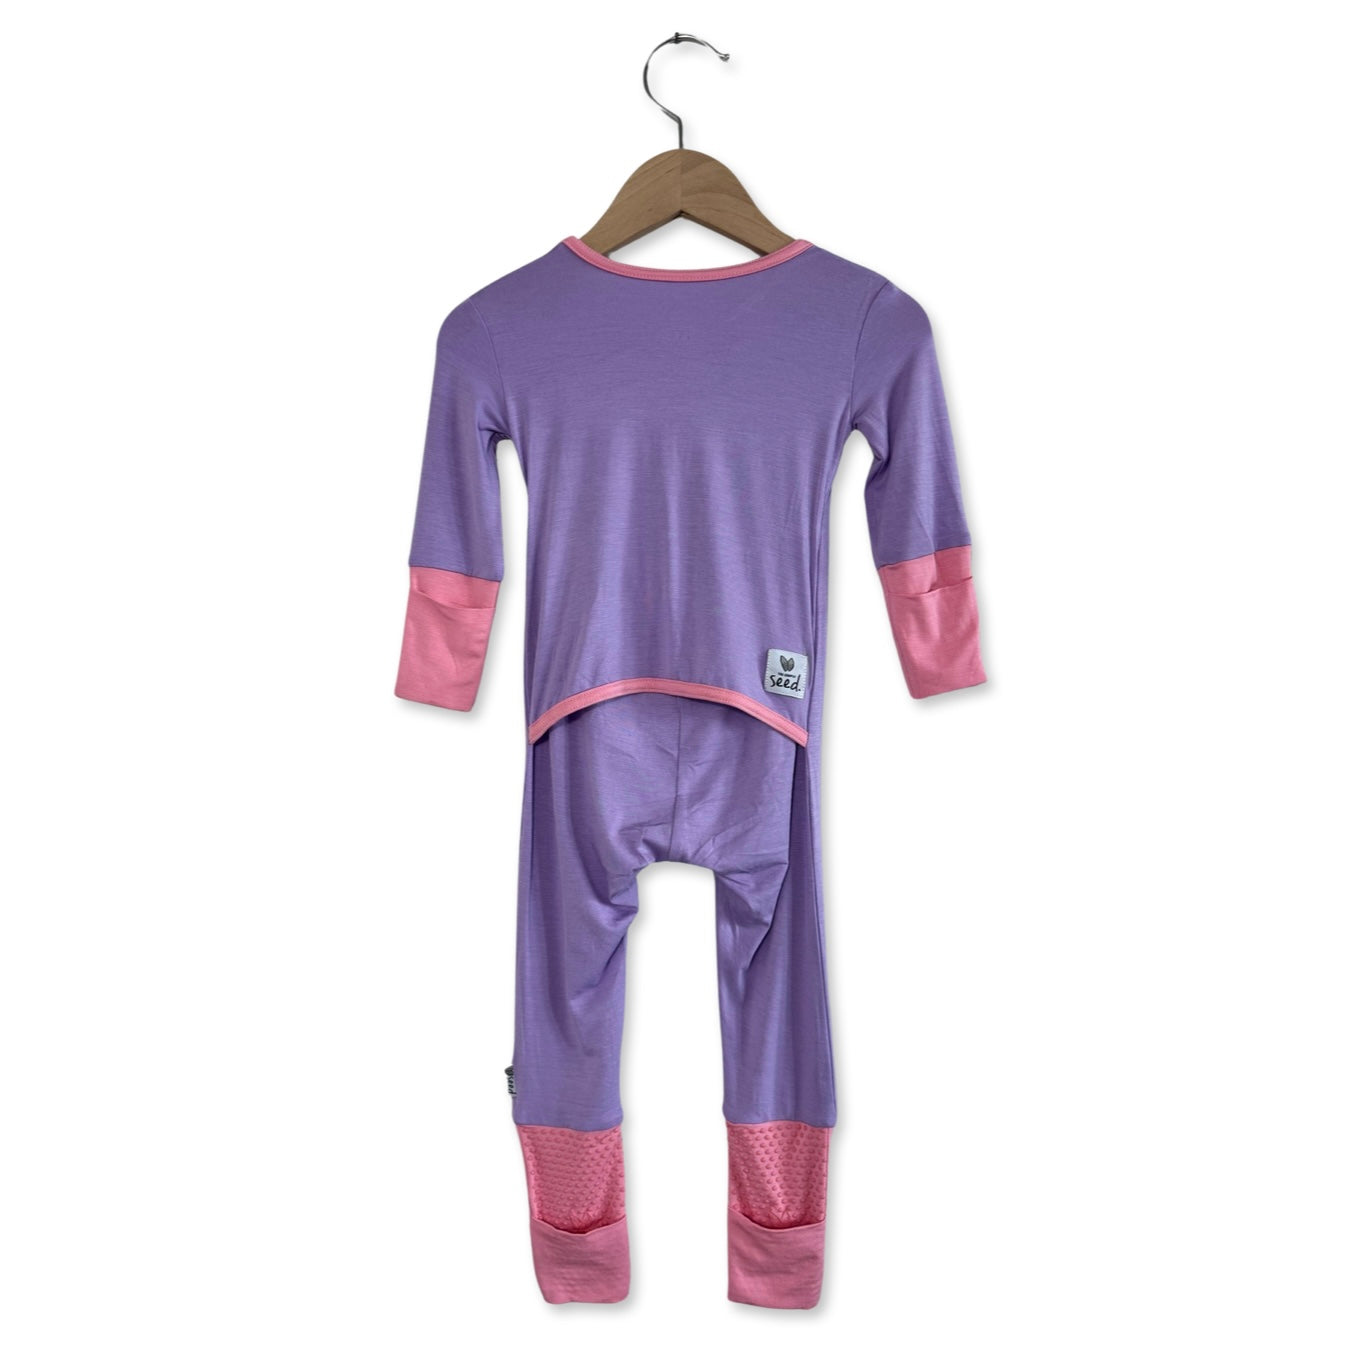 Let's Boogie Kid's Day to Night Romper